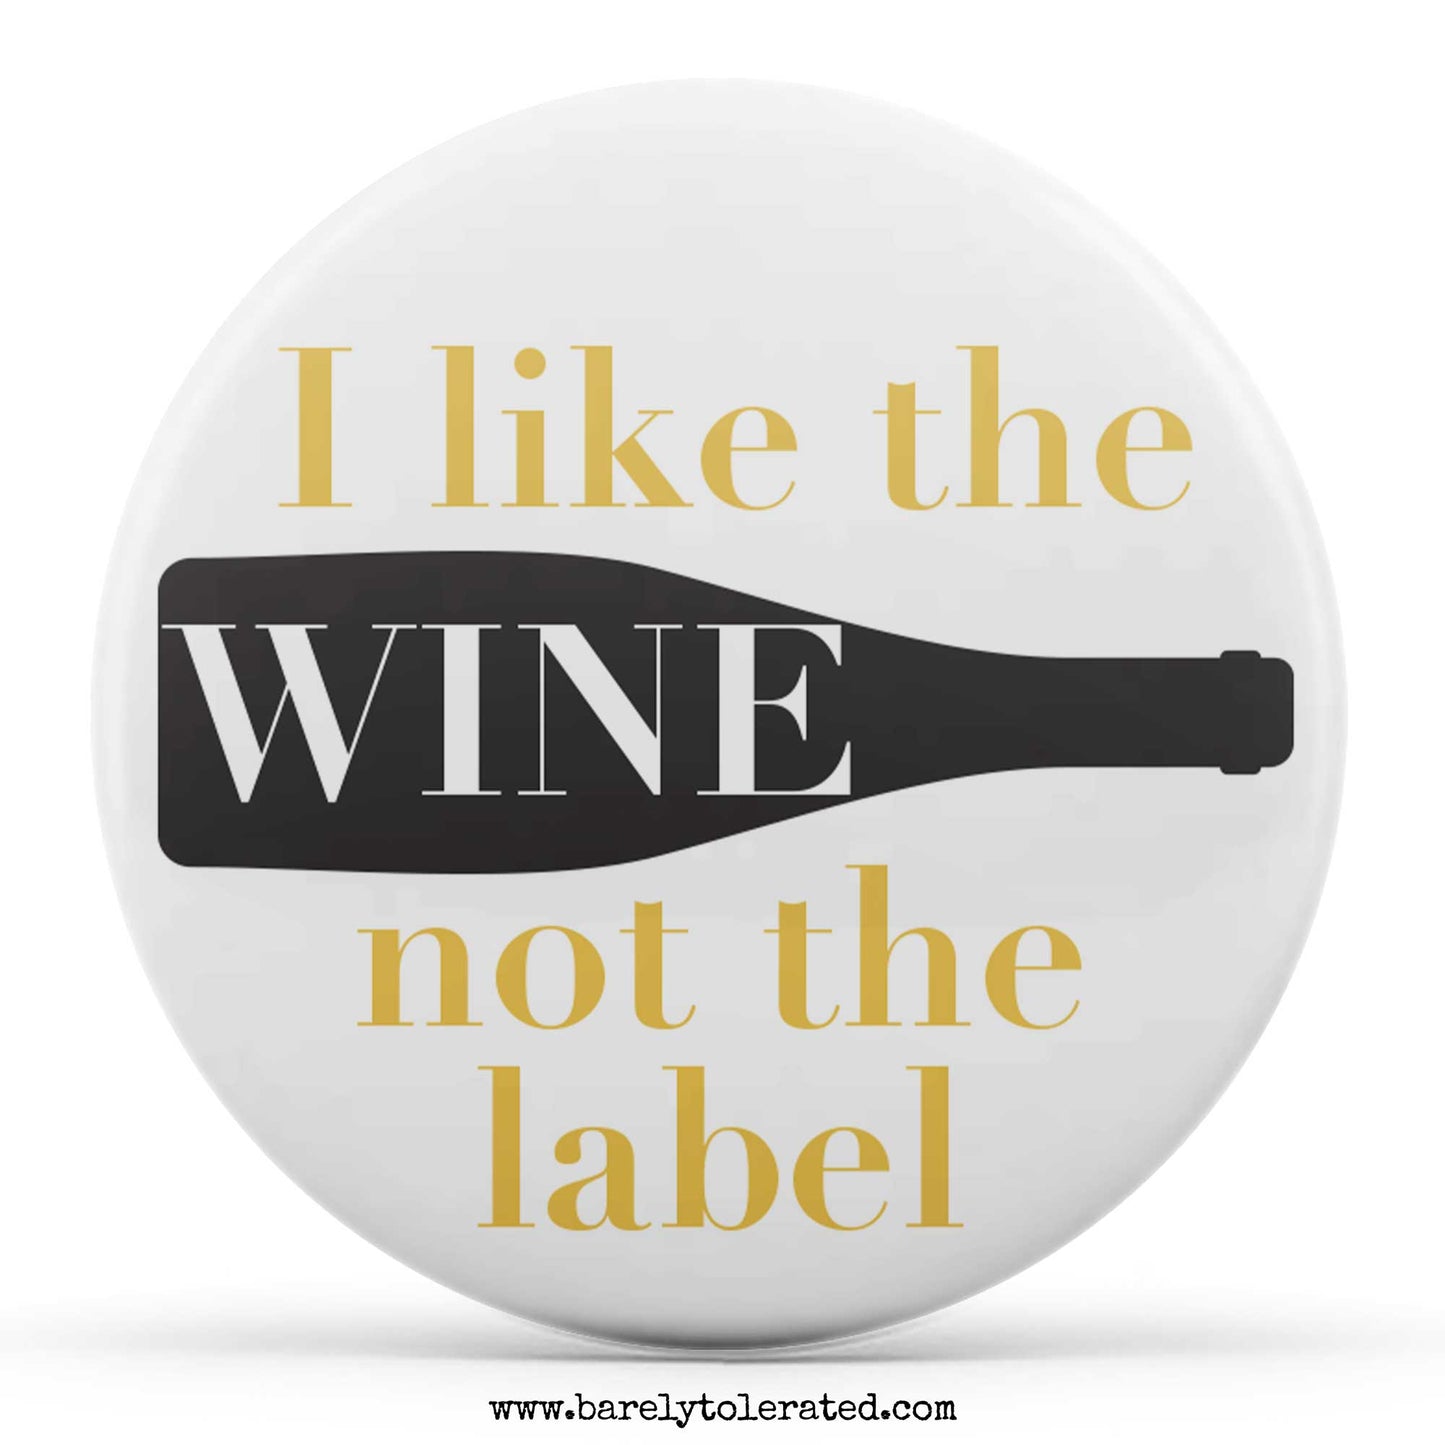 I like the wine, not the label